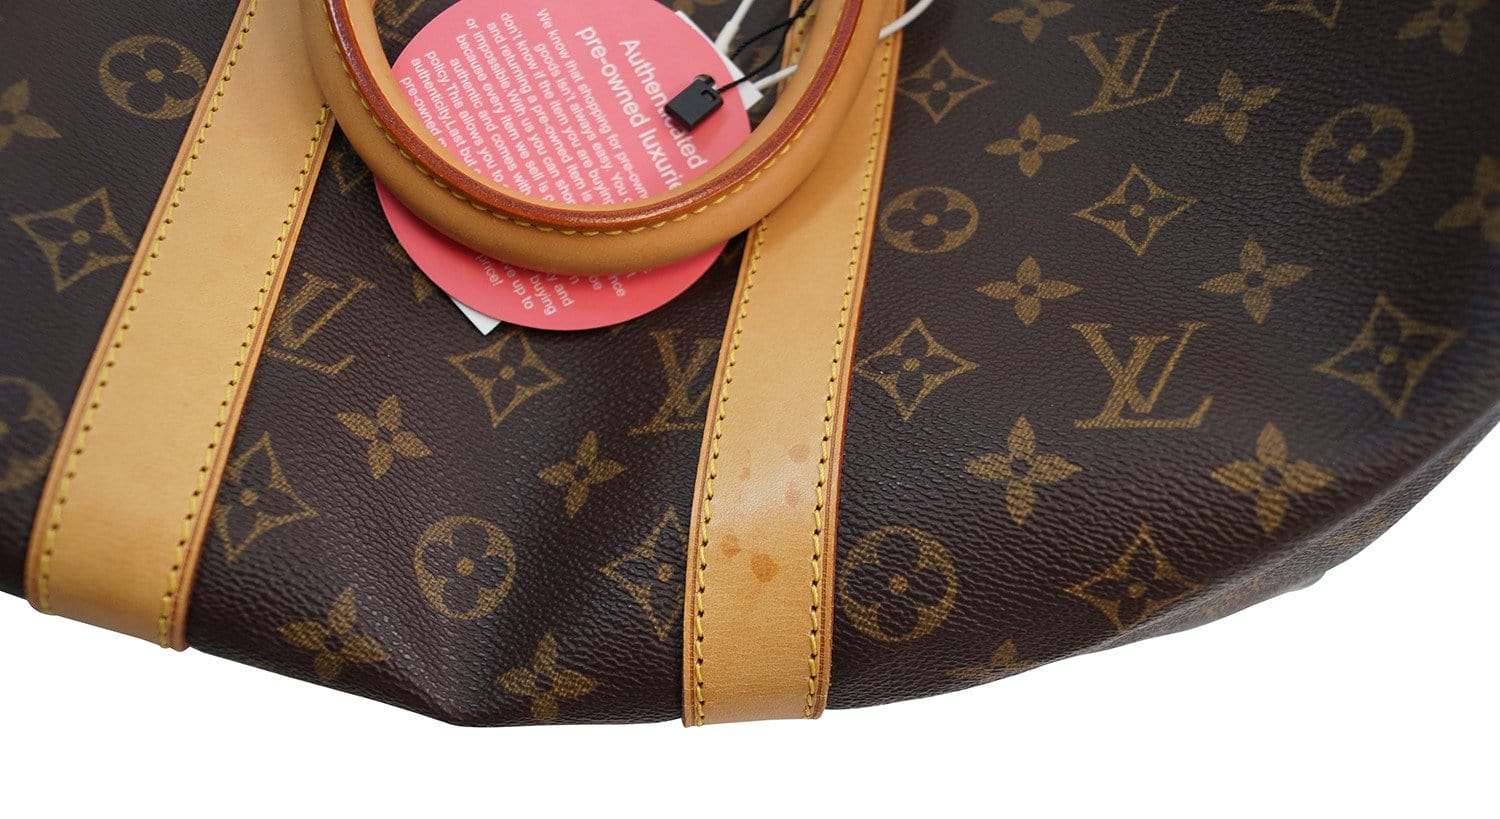 Pre-Owned Louis Vuitton Keepall 45 